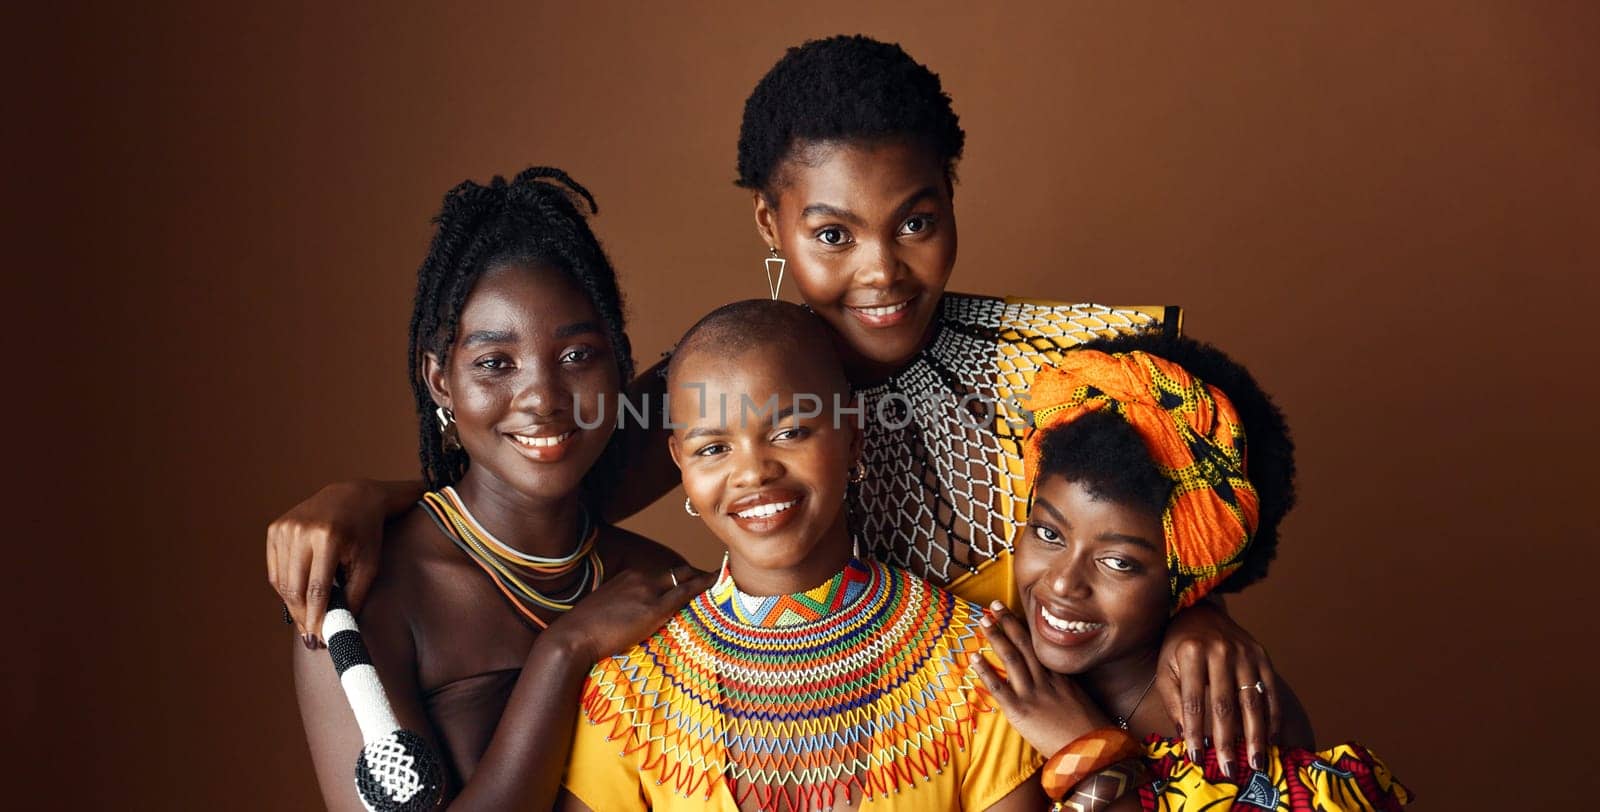 Fashion, beauty and heritage with group of black women in studio on brown background together for support. Portrait, smile and culture with happy African people in clothes of tradition for community.